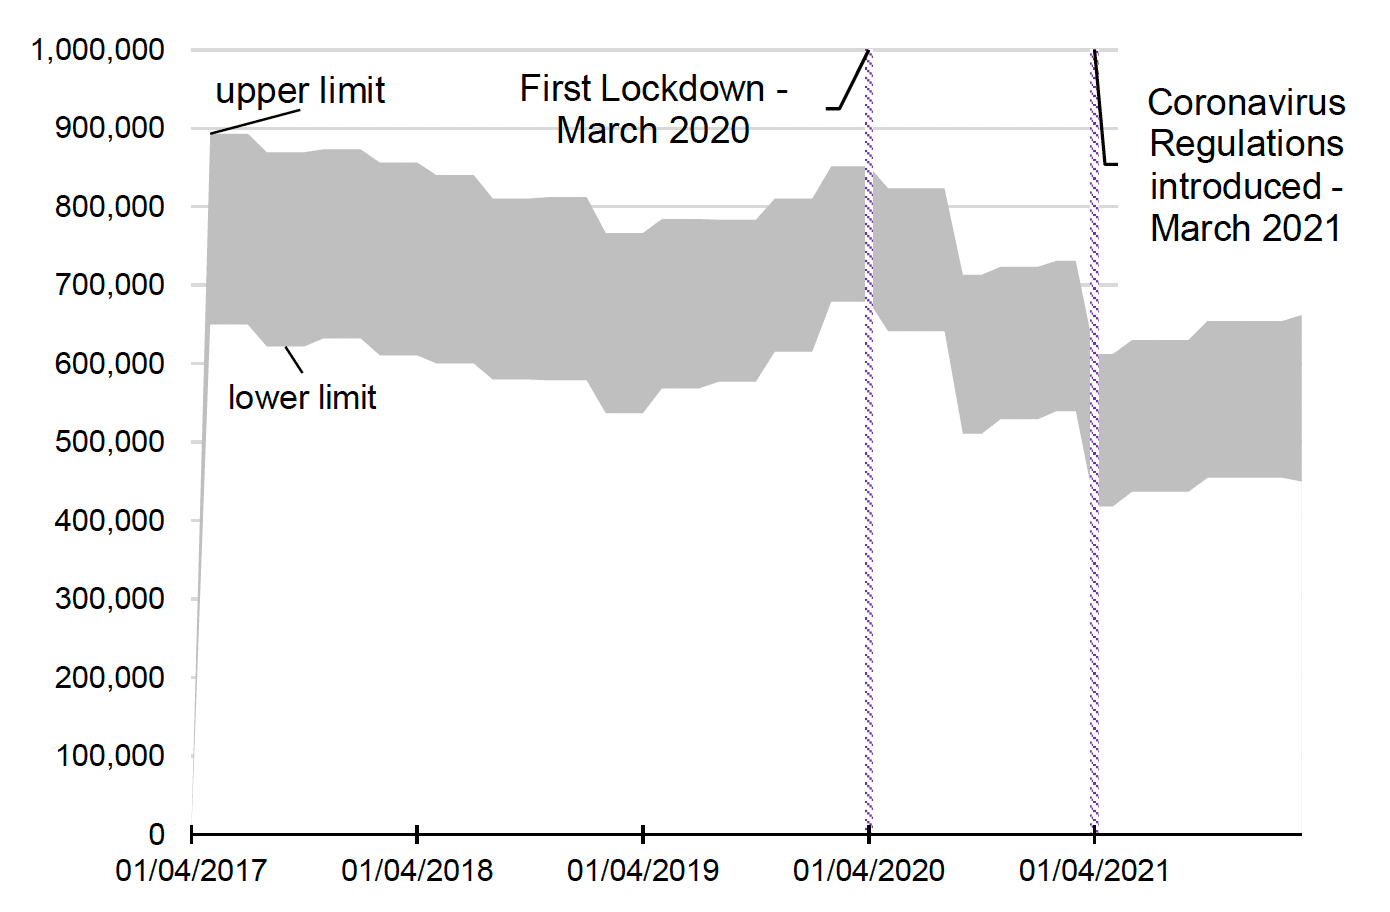 A graph with a grey band representing the first 4 building blocks of the model. This is reasonably stable until March 2020 (first lockdown) where it dips and then dips again March 2021 due to Coronavirus regulations.